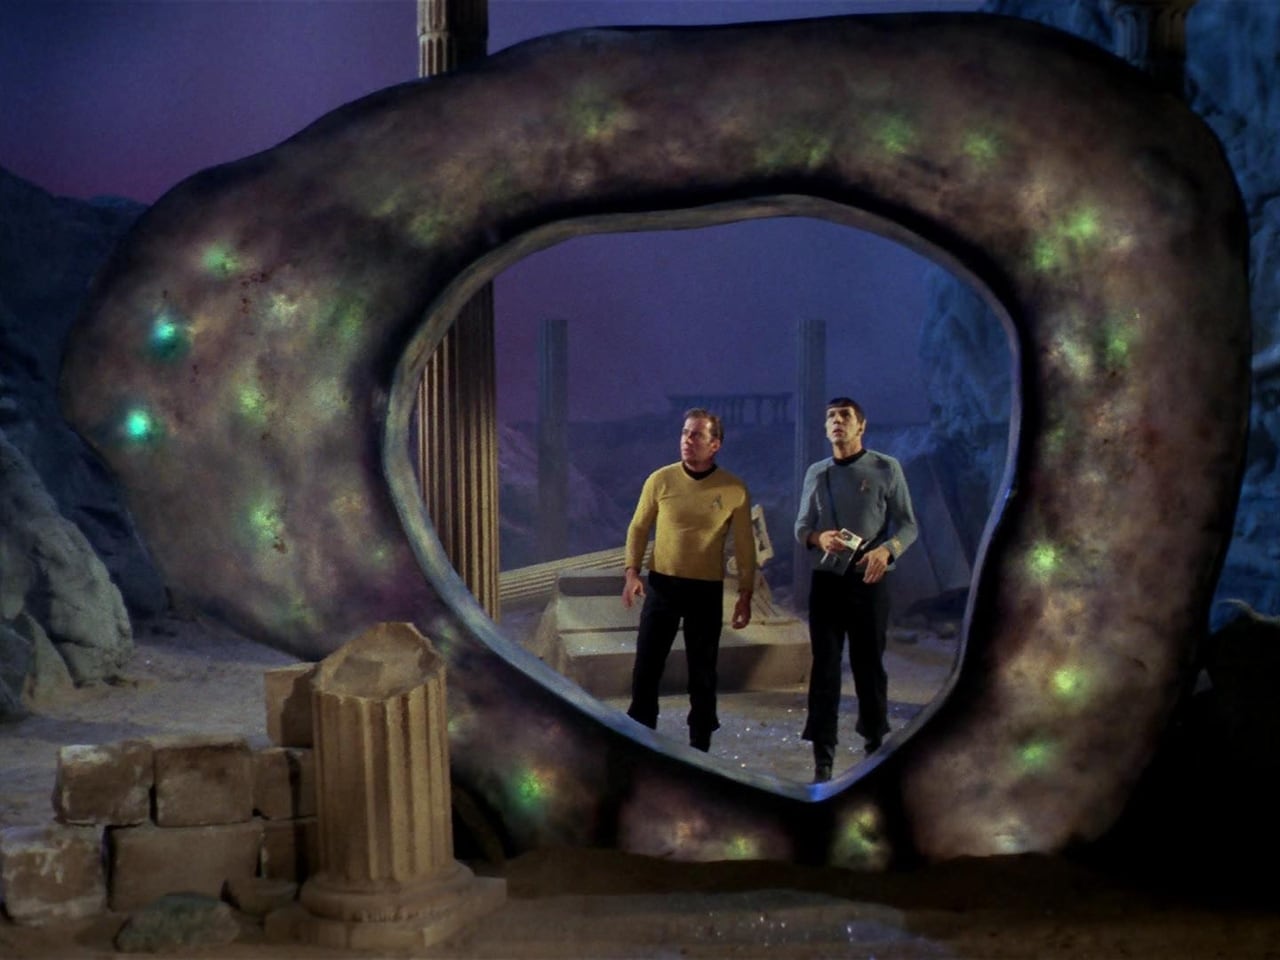 Star Trek: The Original Series “The City On The Edge Of Forever” Review